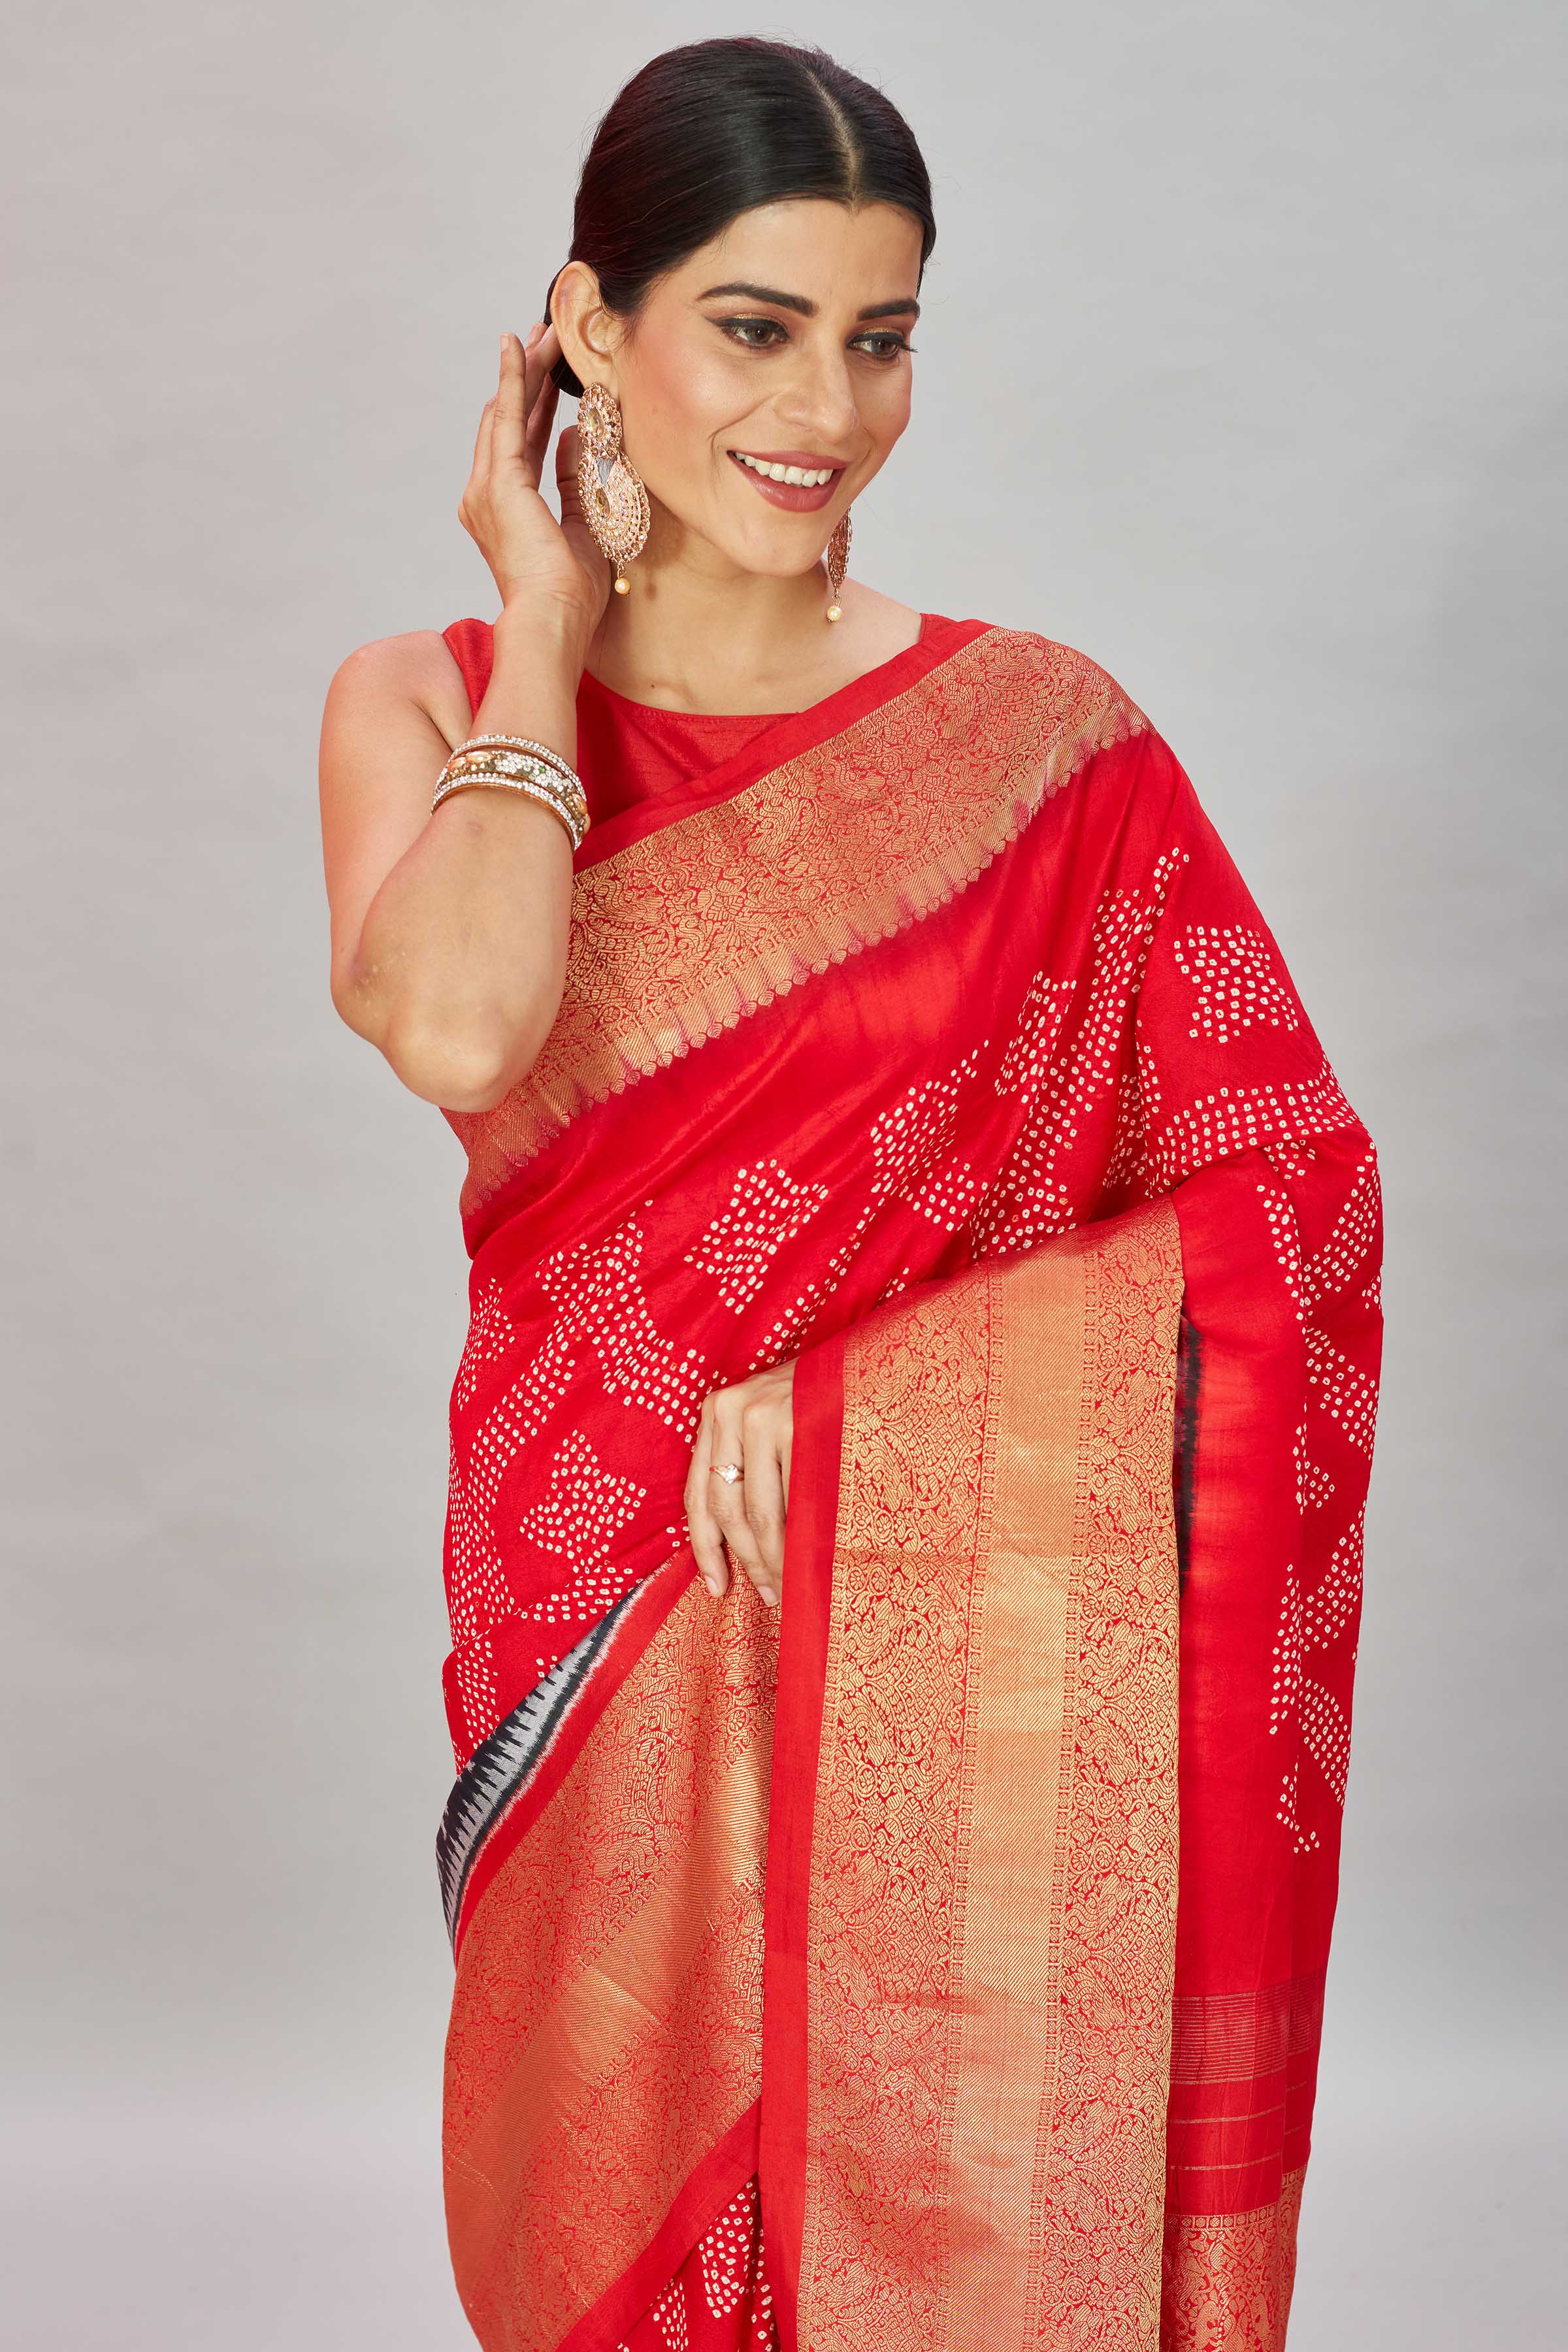 Buy red bandhej Kanjivaram silk saree online in USA with ikkat border. Look your best on festive occasions in latest designer sarees, pure silk sarees, Kanjivaram silk saris, handwoven saris, tussar silk sarees, embroidered saris from Pure Elegance Indian clothing store in USA.-closeup